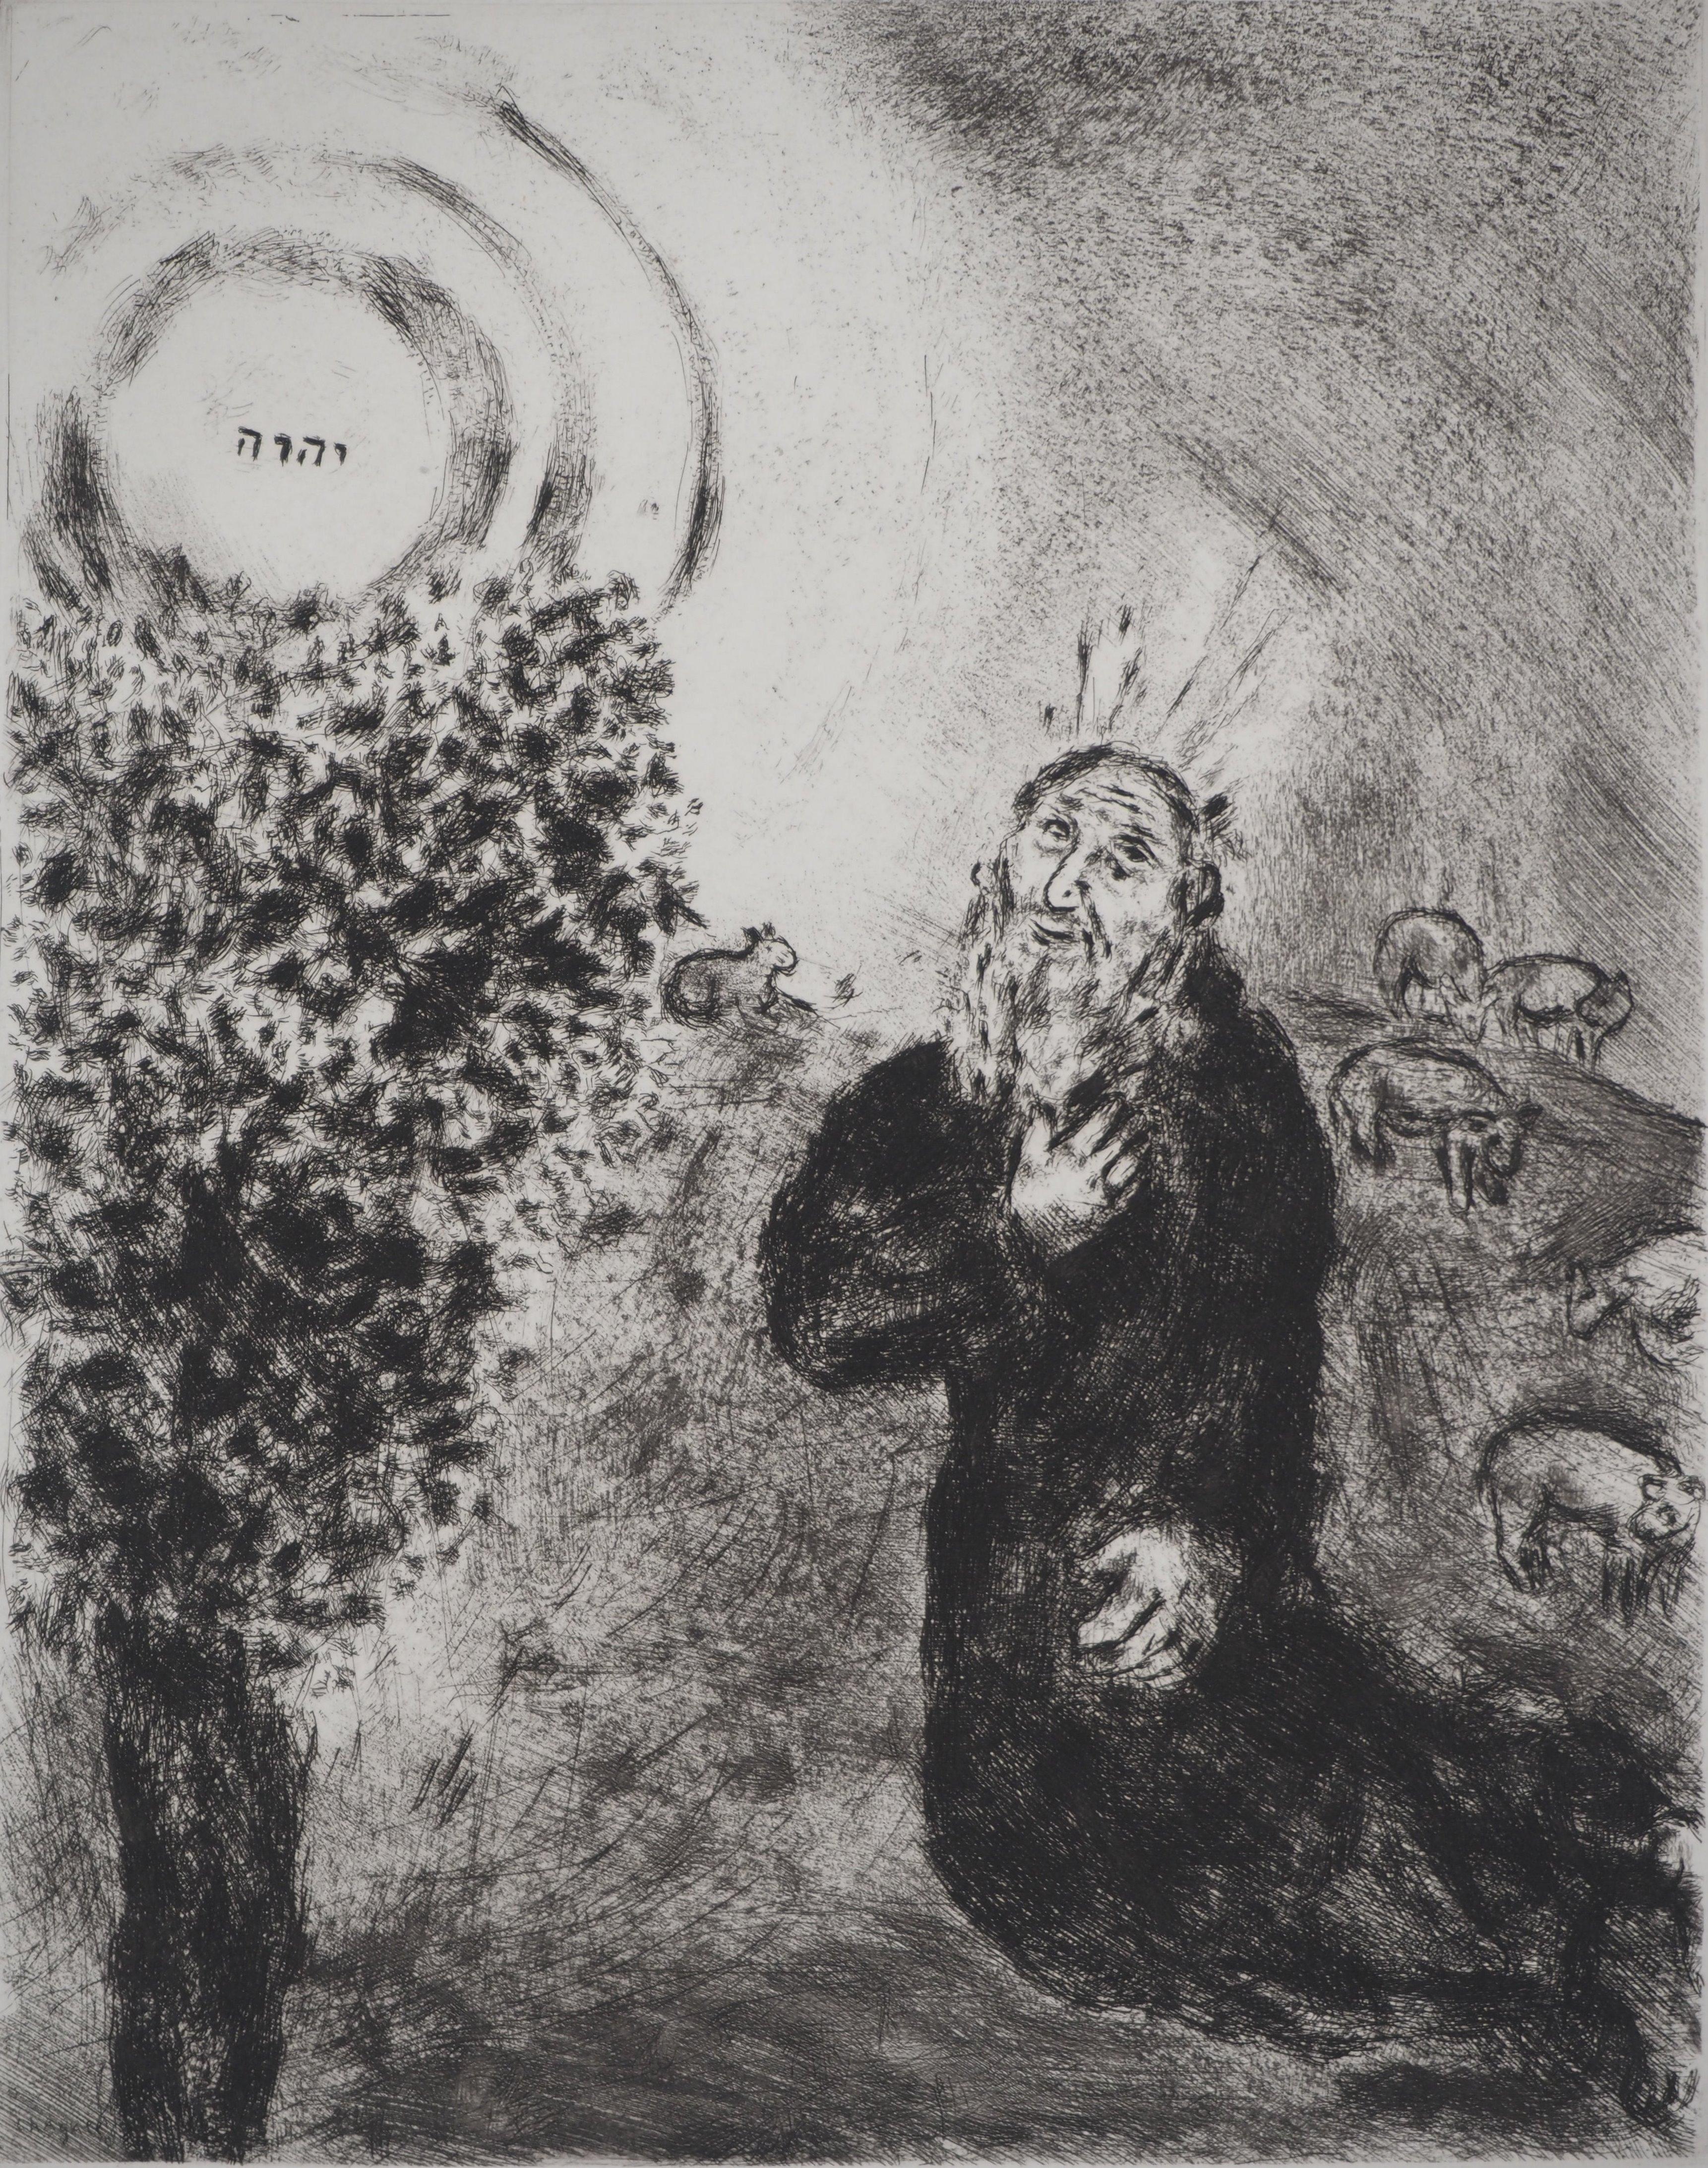 Marc Chagall (1887-1958)
Bible : The burning bush (Le buisson ardent), 1939

Original etching
Printed signature in the plate
On Montval vellum, 44 x 33.5 cm (c. 17.3 x 13.1 inch)

INFORMATION: Published by Vollard / Tériade in 1956

REFERENCE: